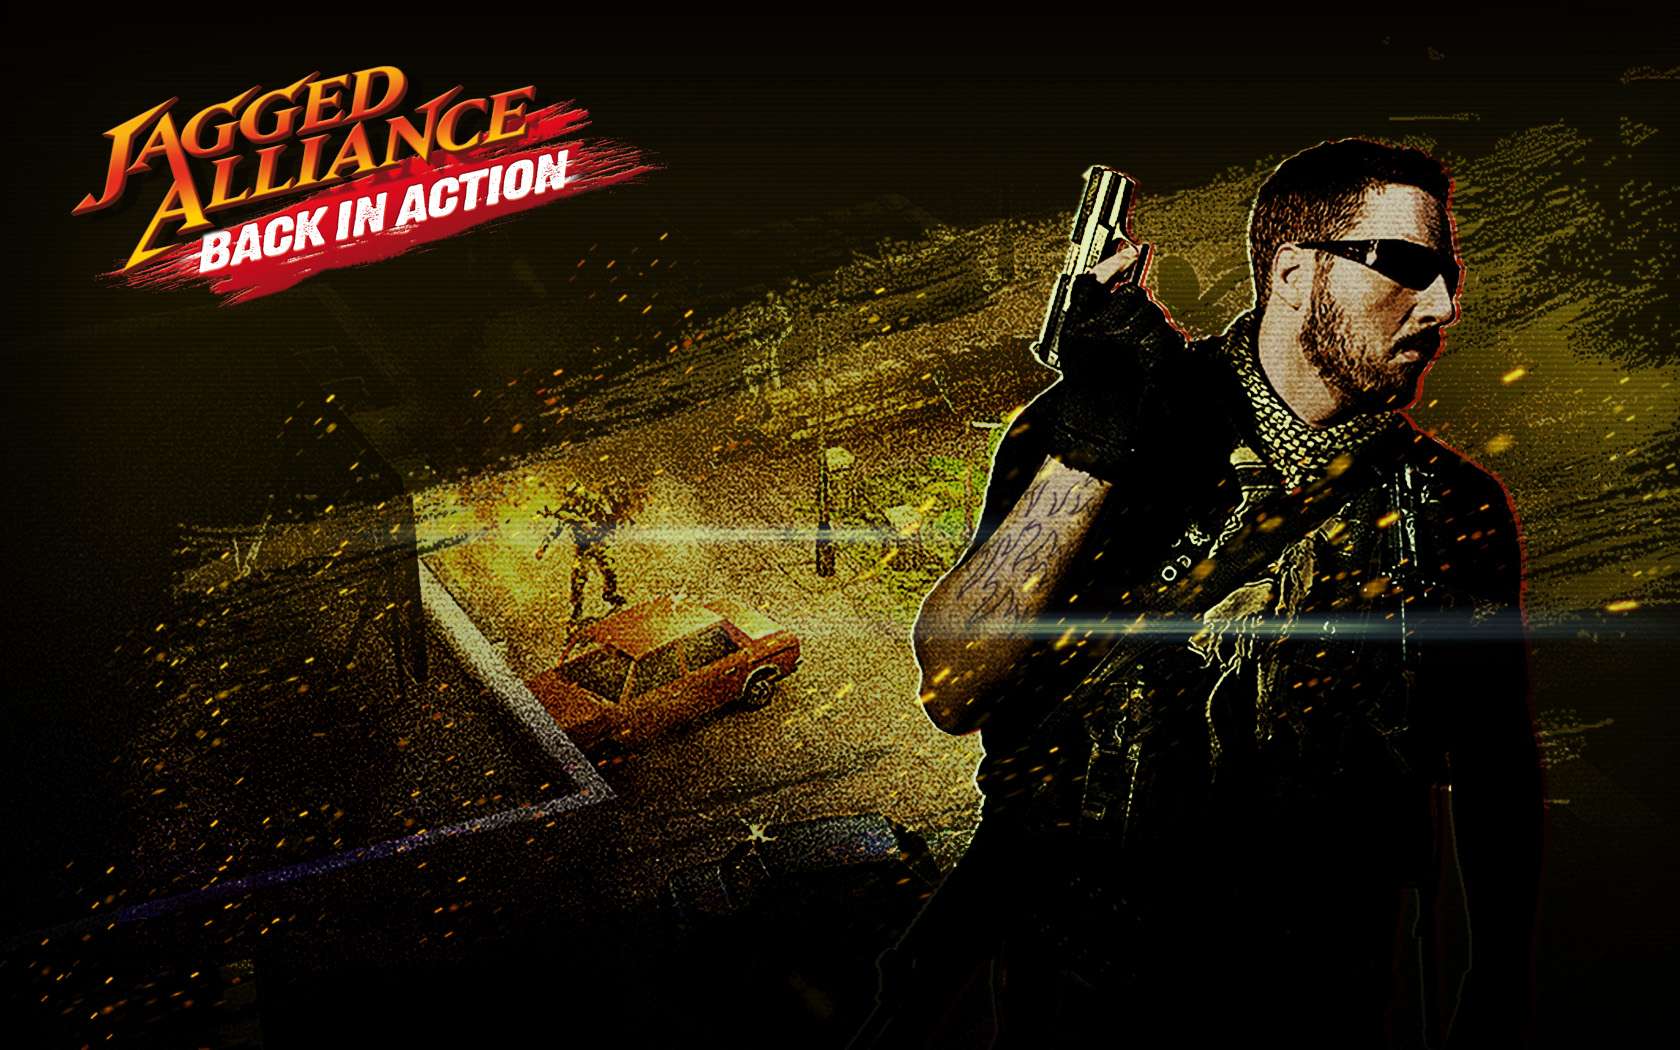 Jagged Alliance Back in Action Wallpaper 02